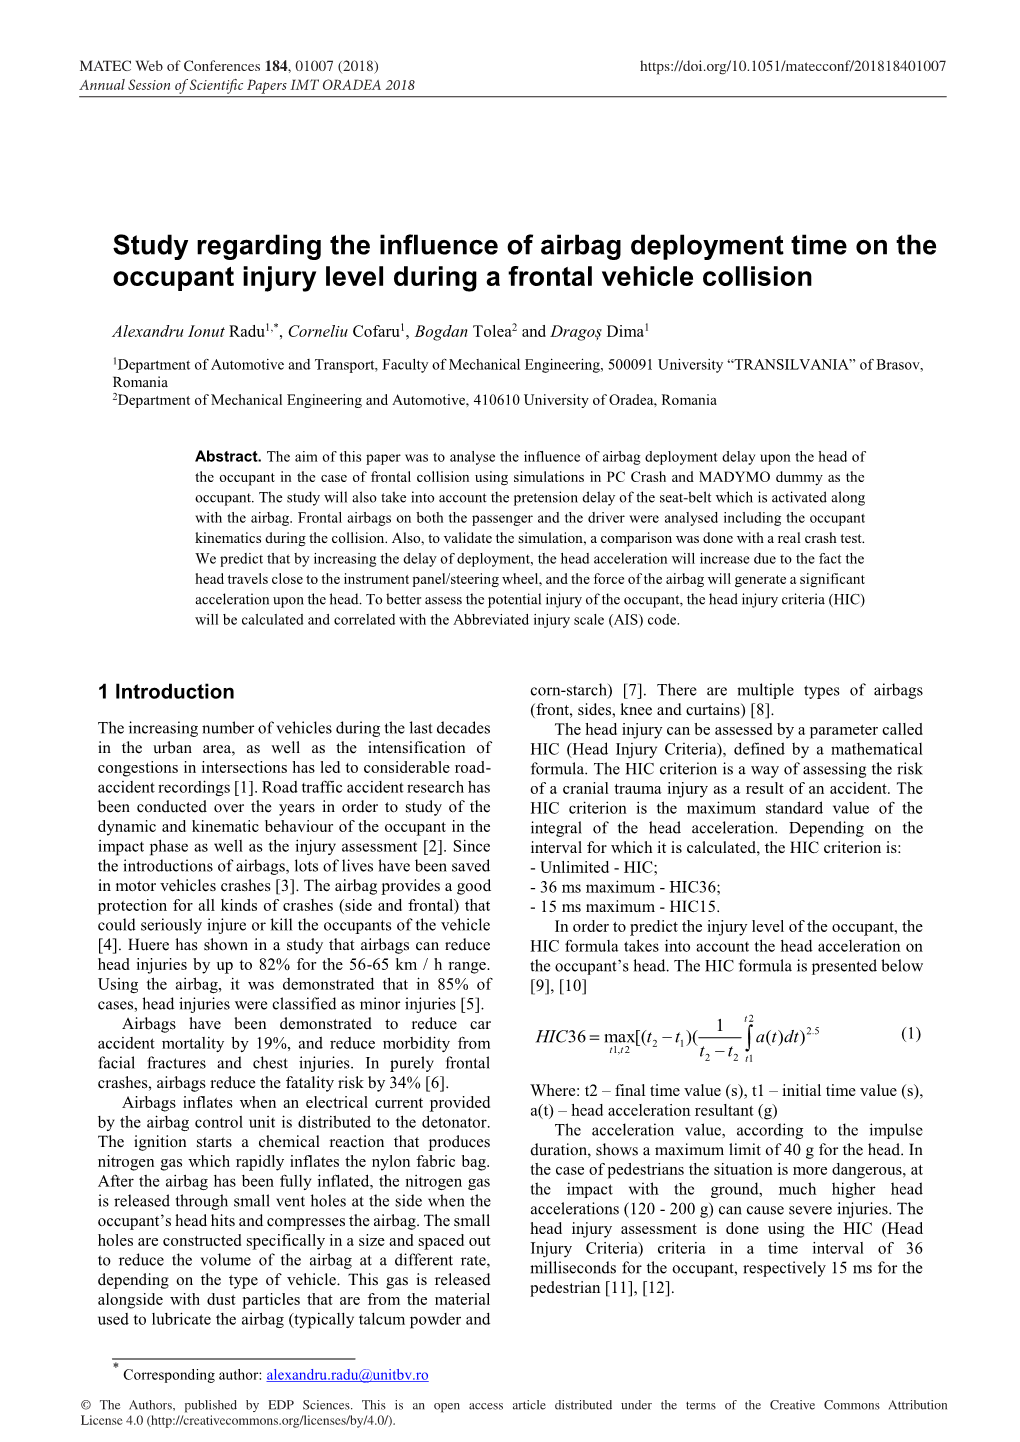 Study Regarding the Influence of Airbag Deployment Time on the Occupant Injury Level During a Frontal Vehicle Collision